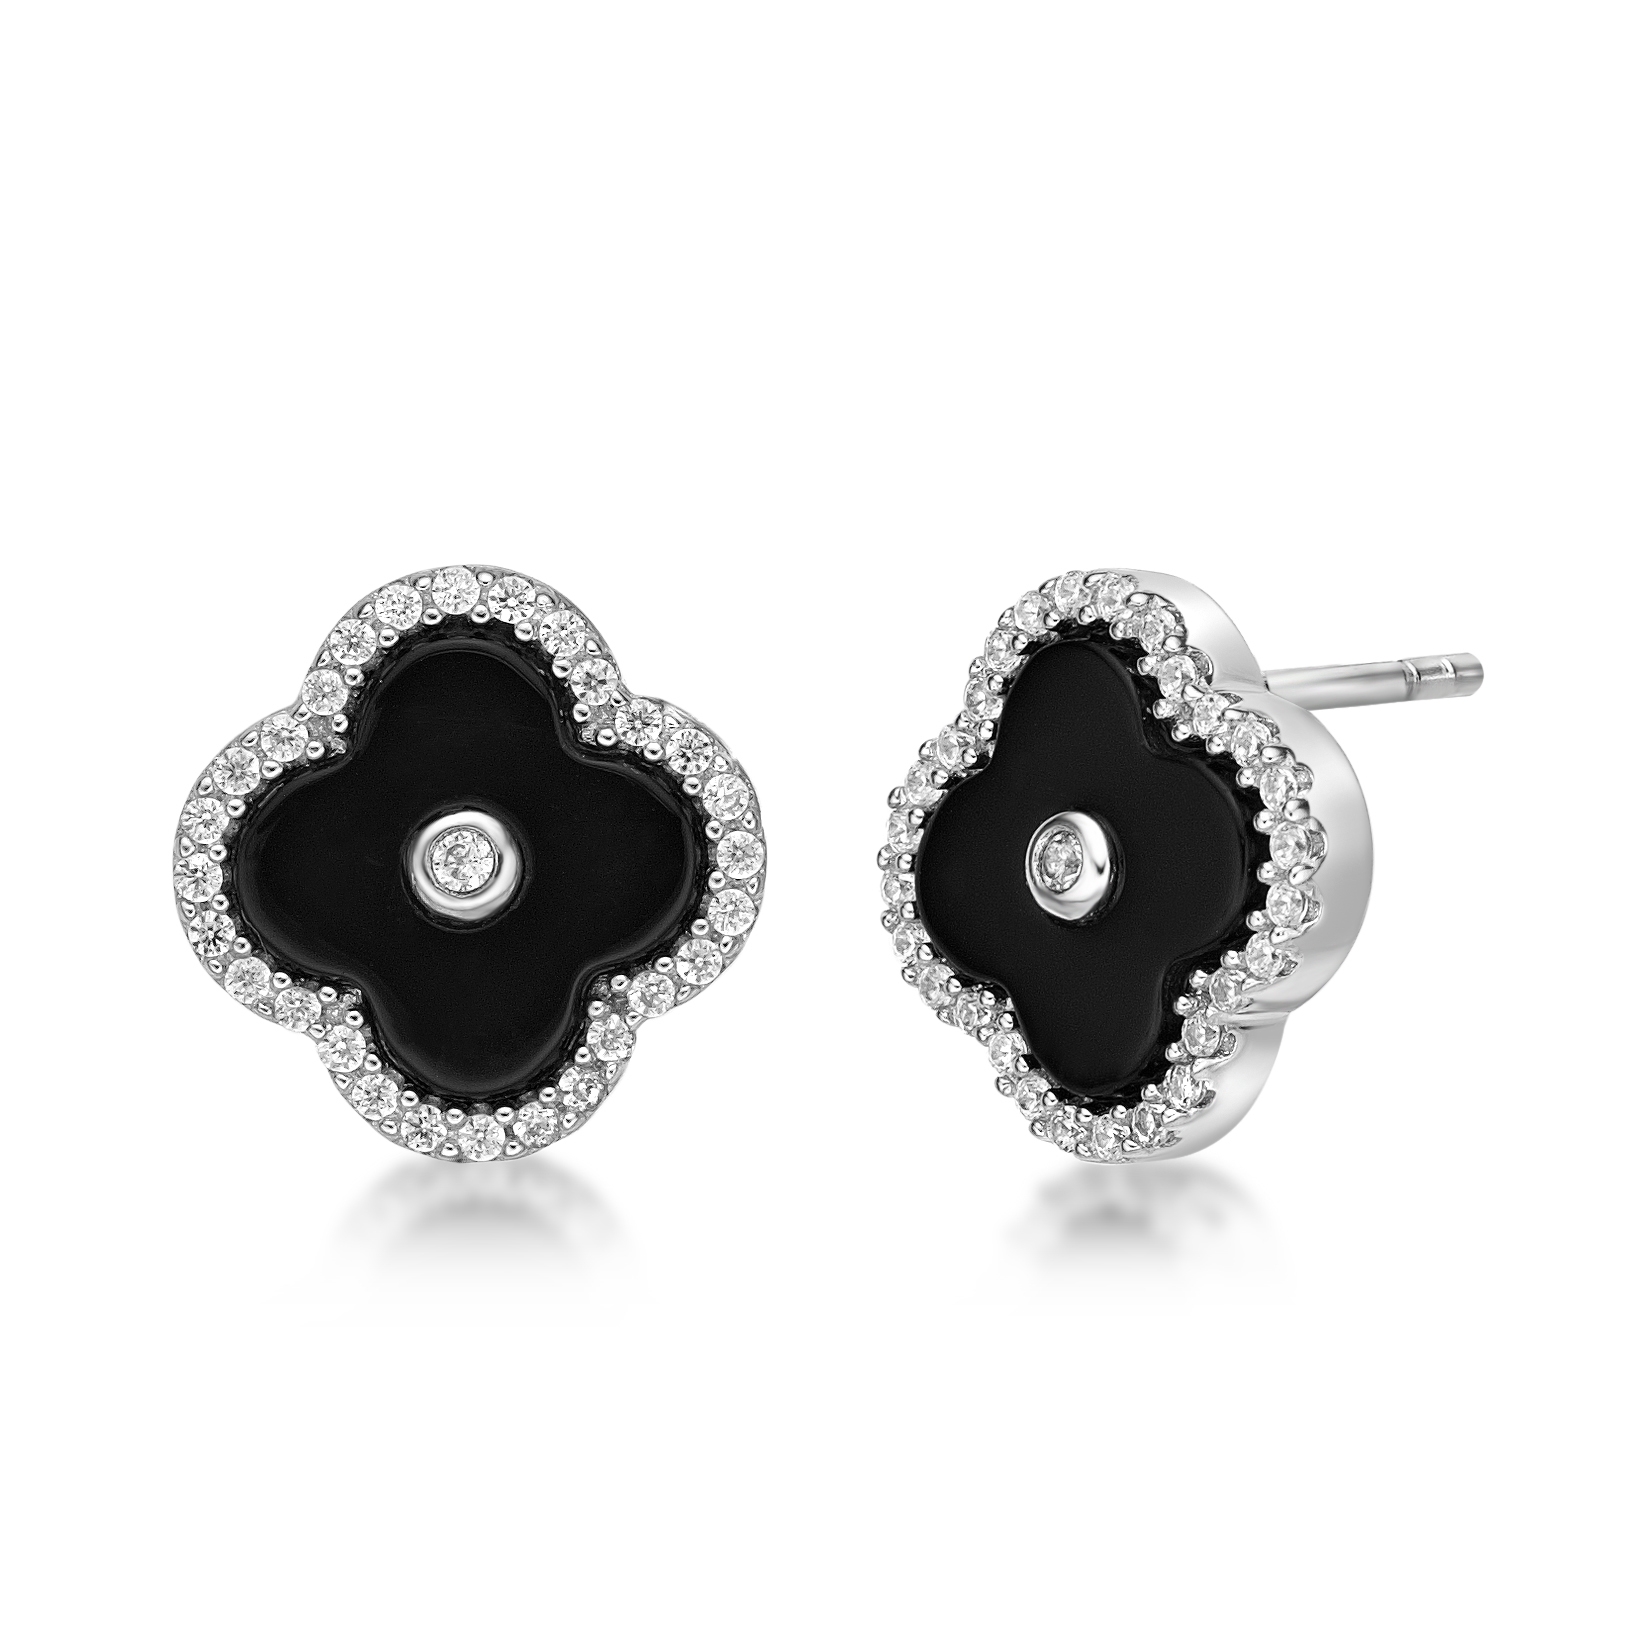 Solitaire Stud Earrings Round Button Earrings 925 Sterling Silver Choose Color 